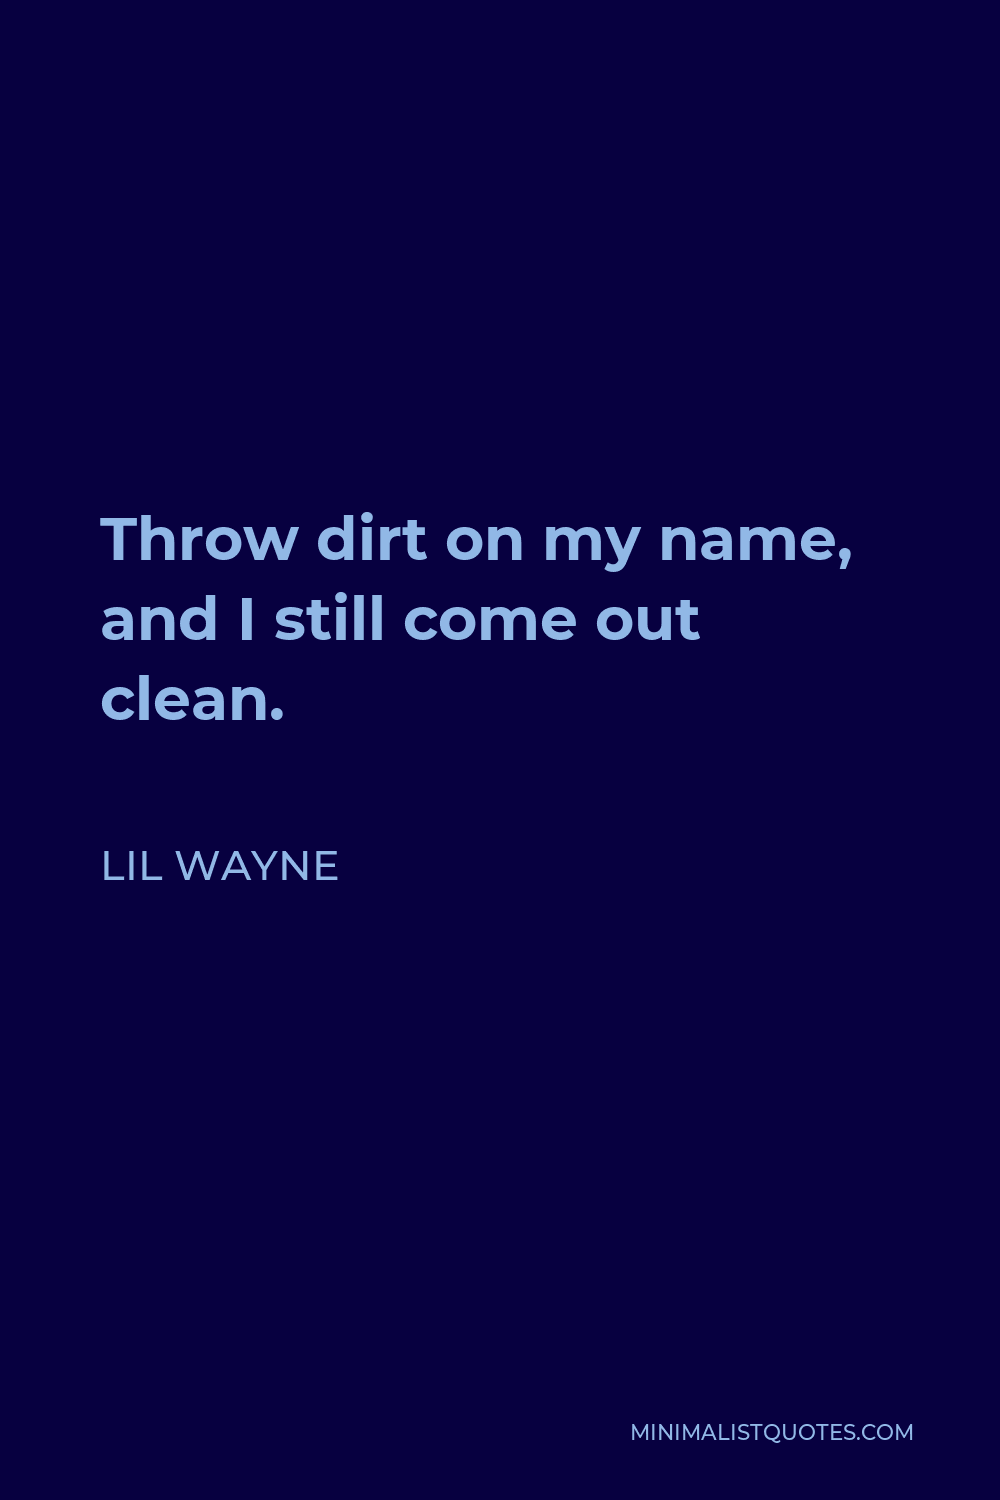 Lil Wayne Quote - Throw dirt on my name, and I still come out clean.